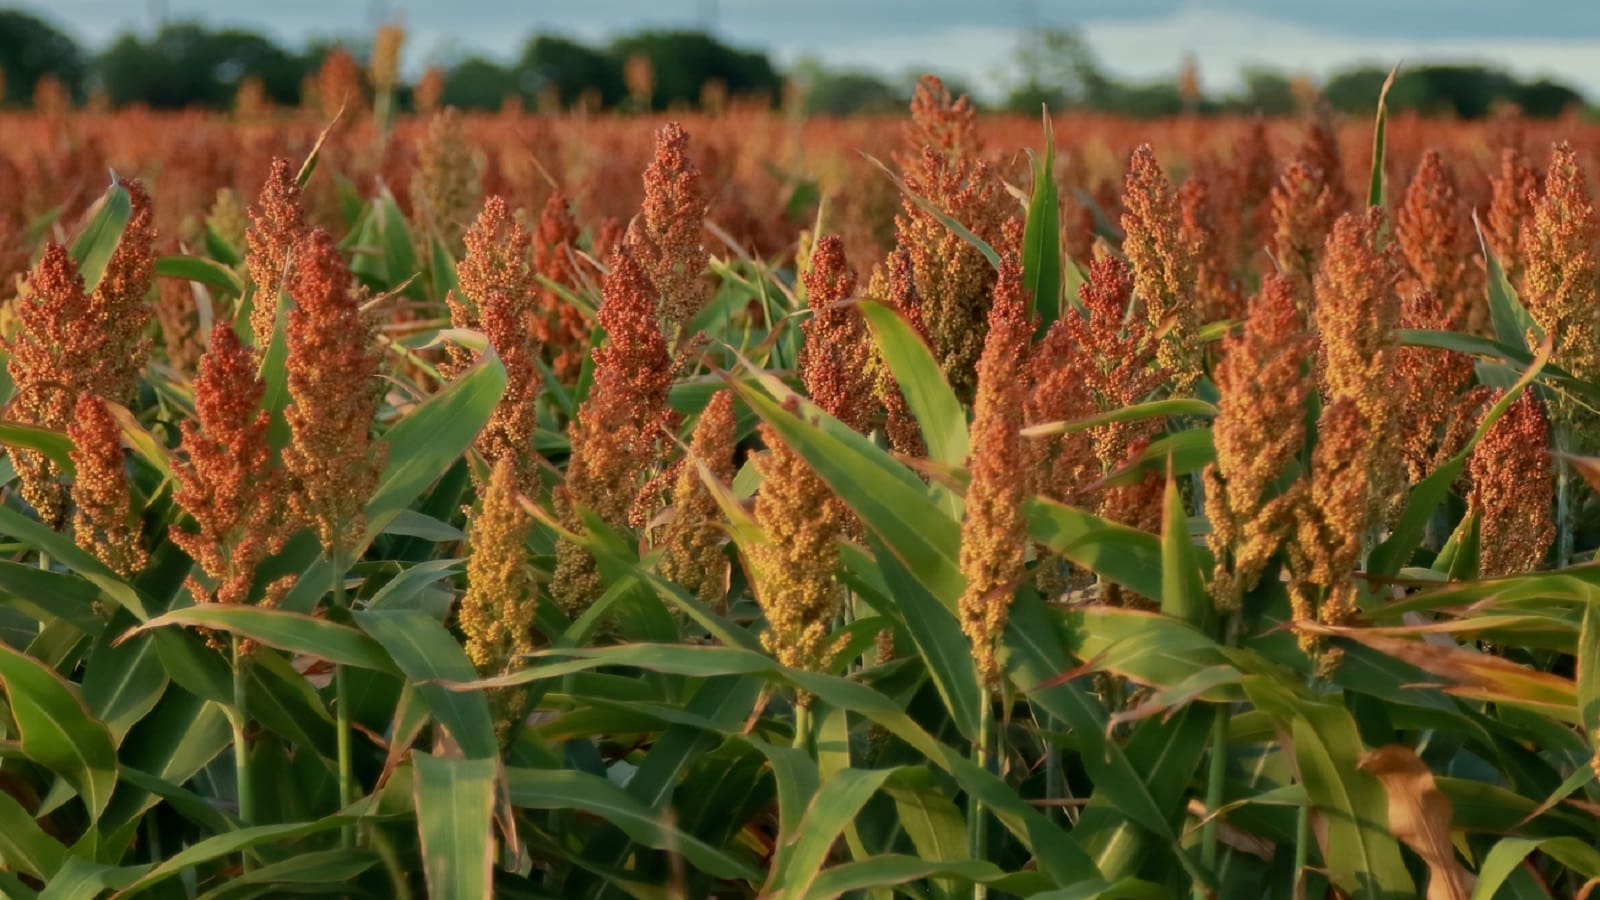 World Food Programme challenges Tanzania to boost sorghum production